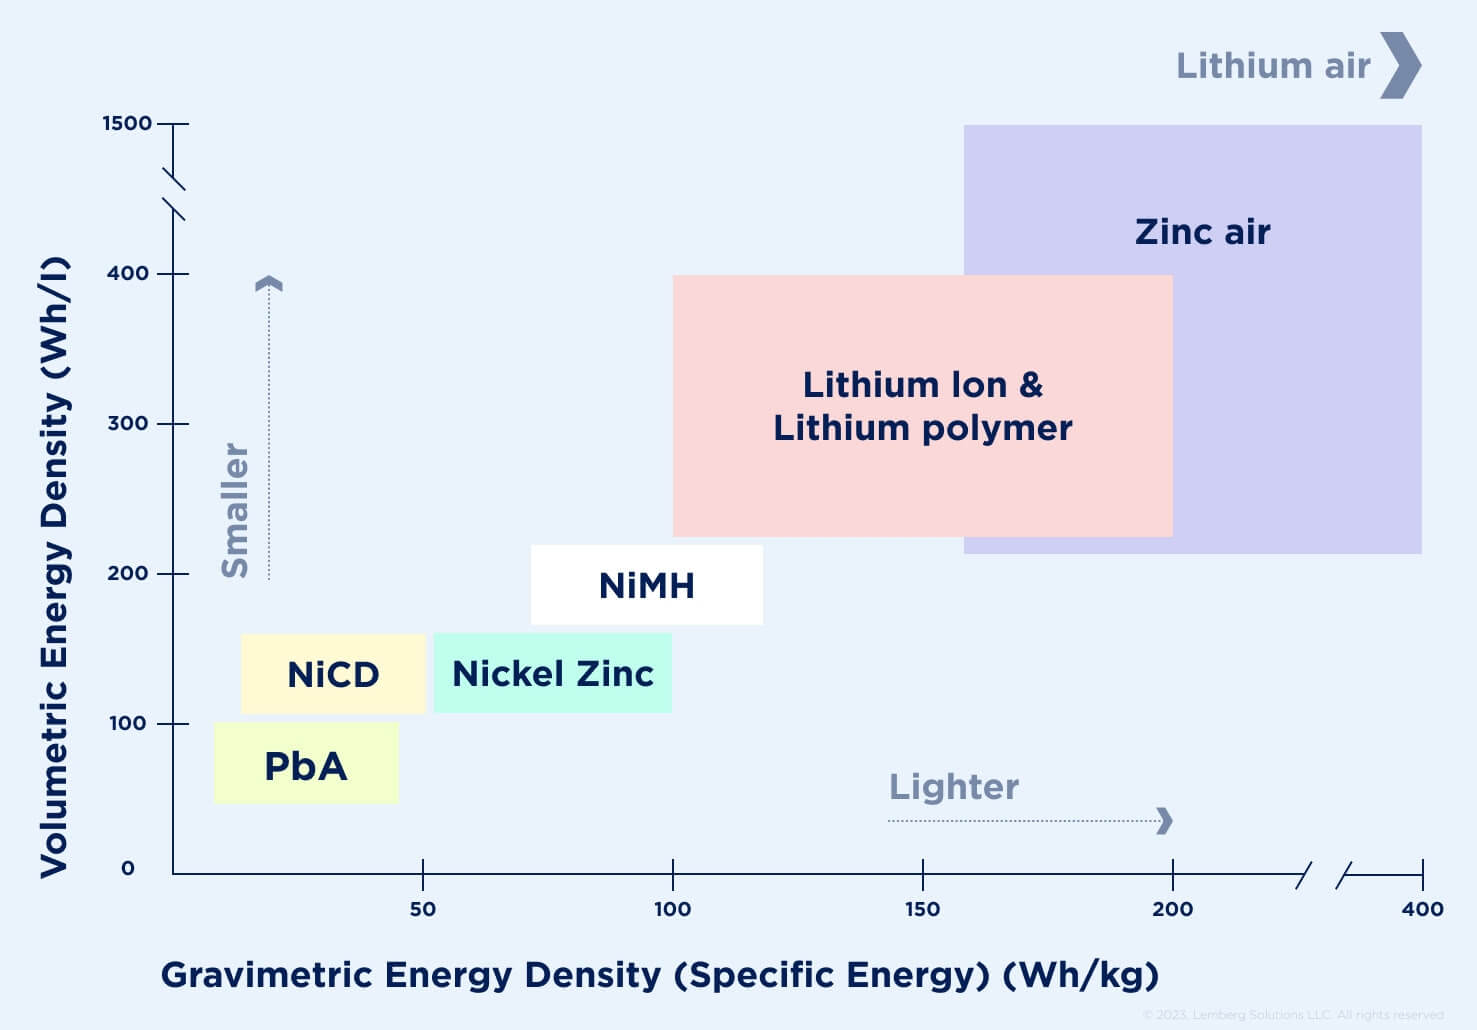 Key Differences Between Lithium Ion and Lithium Iron Batteries